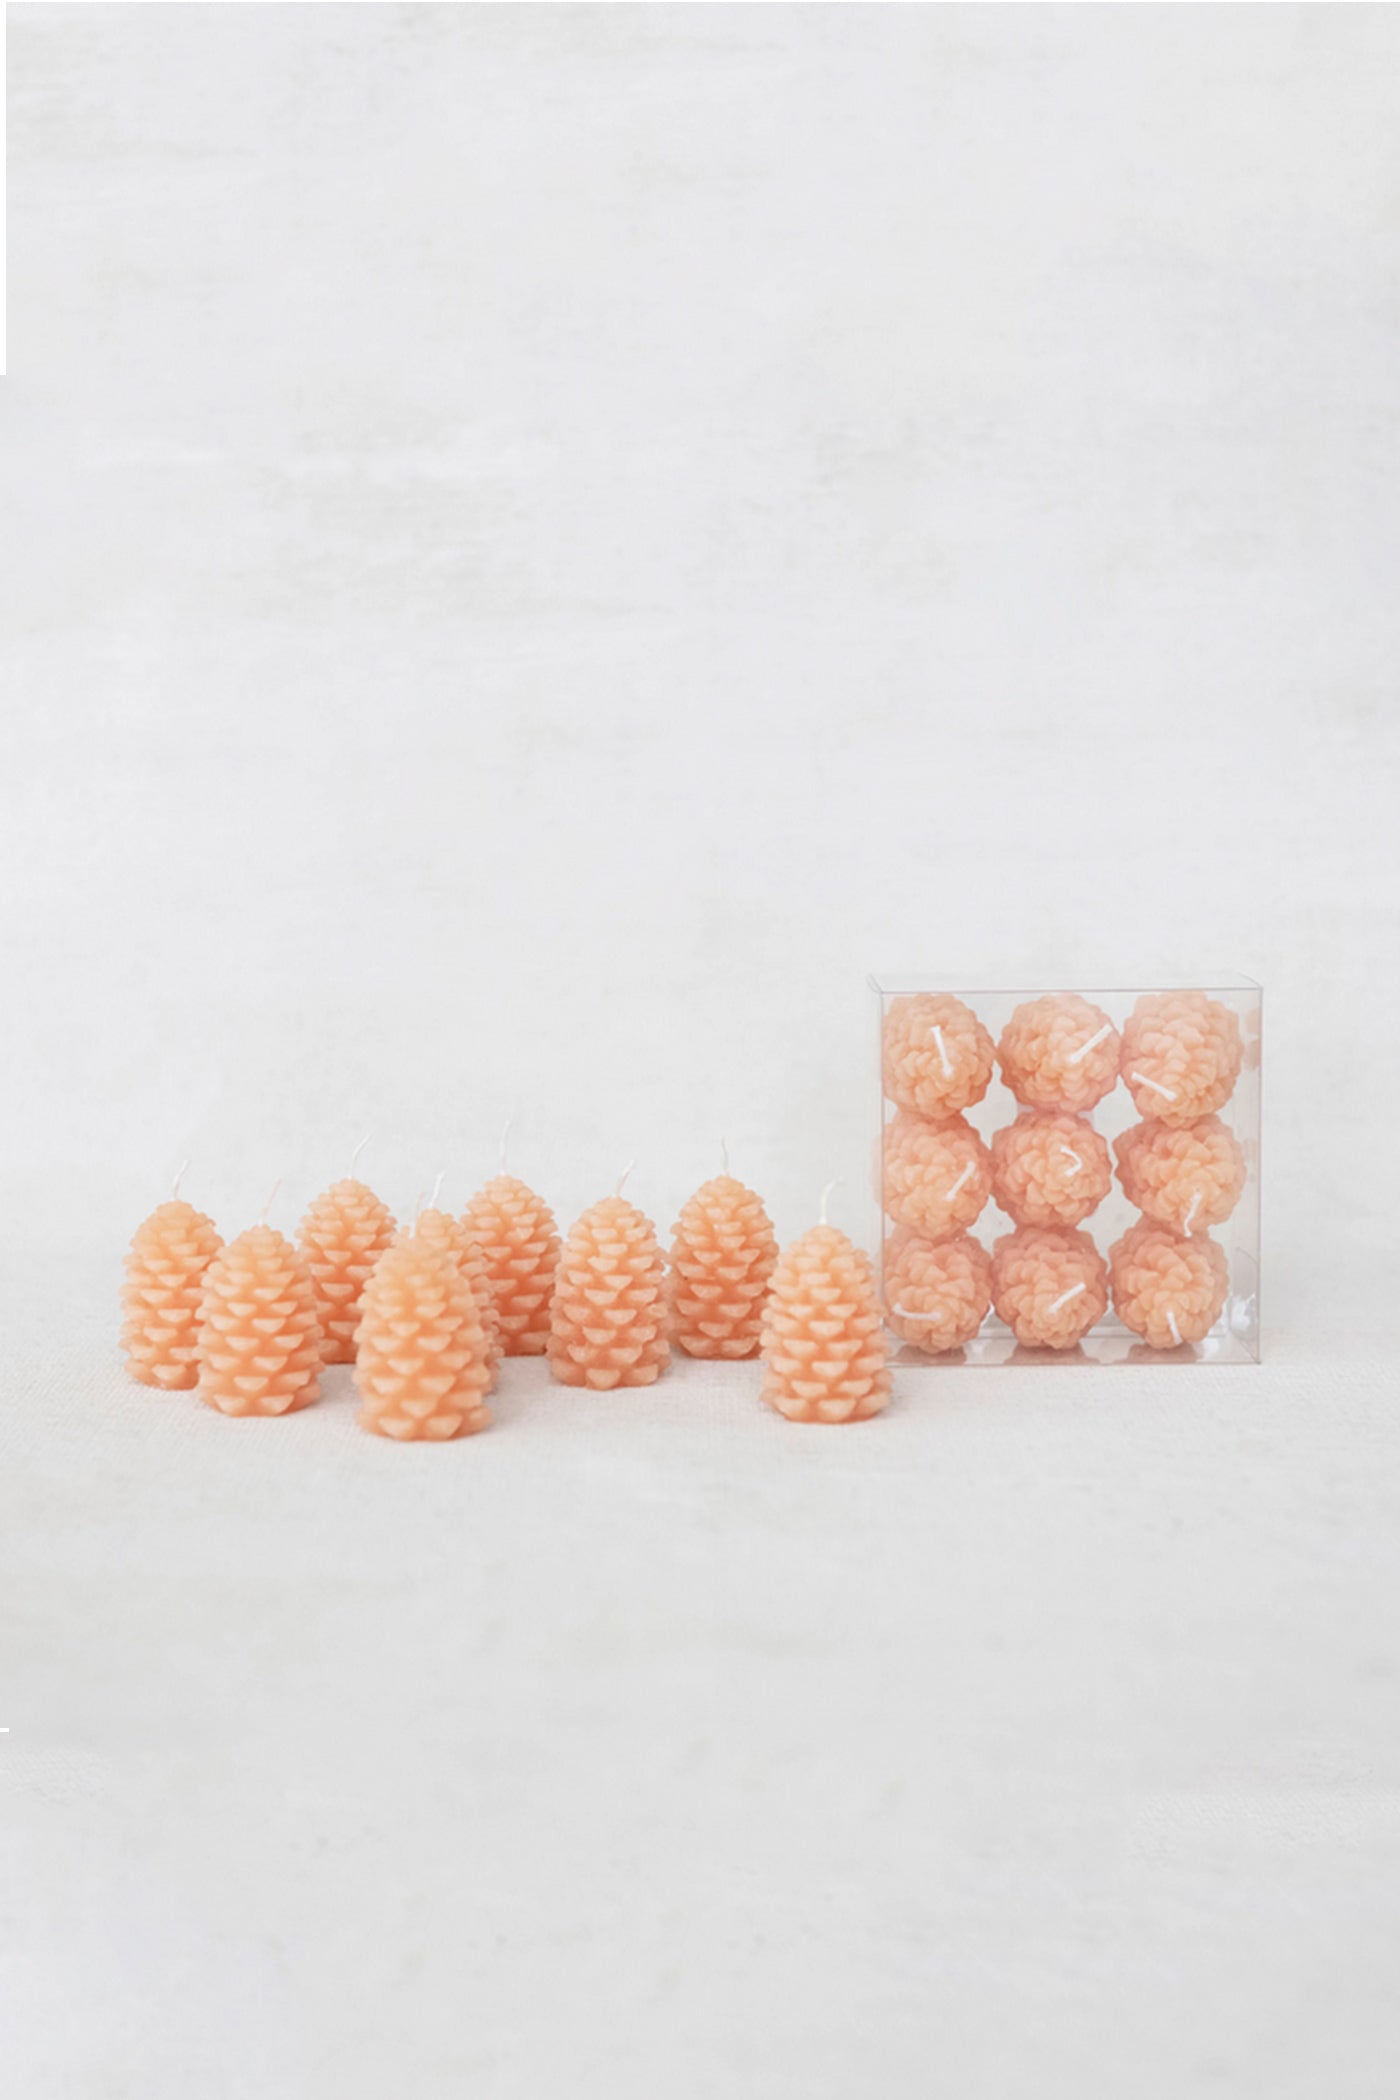 Unscented Pinecone Shaped Tealights-Orange